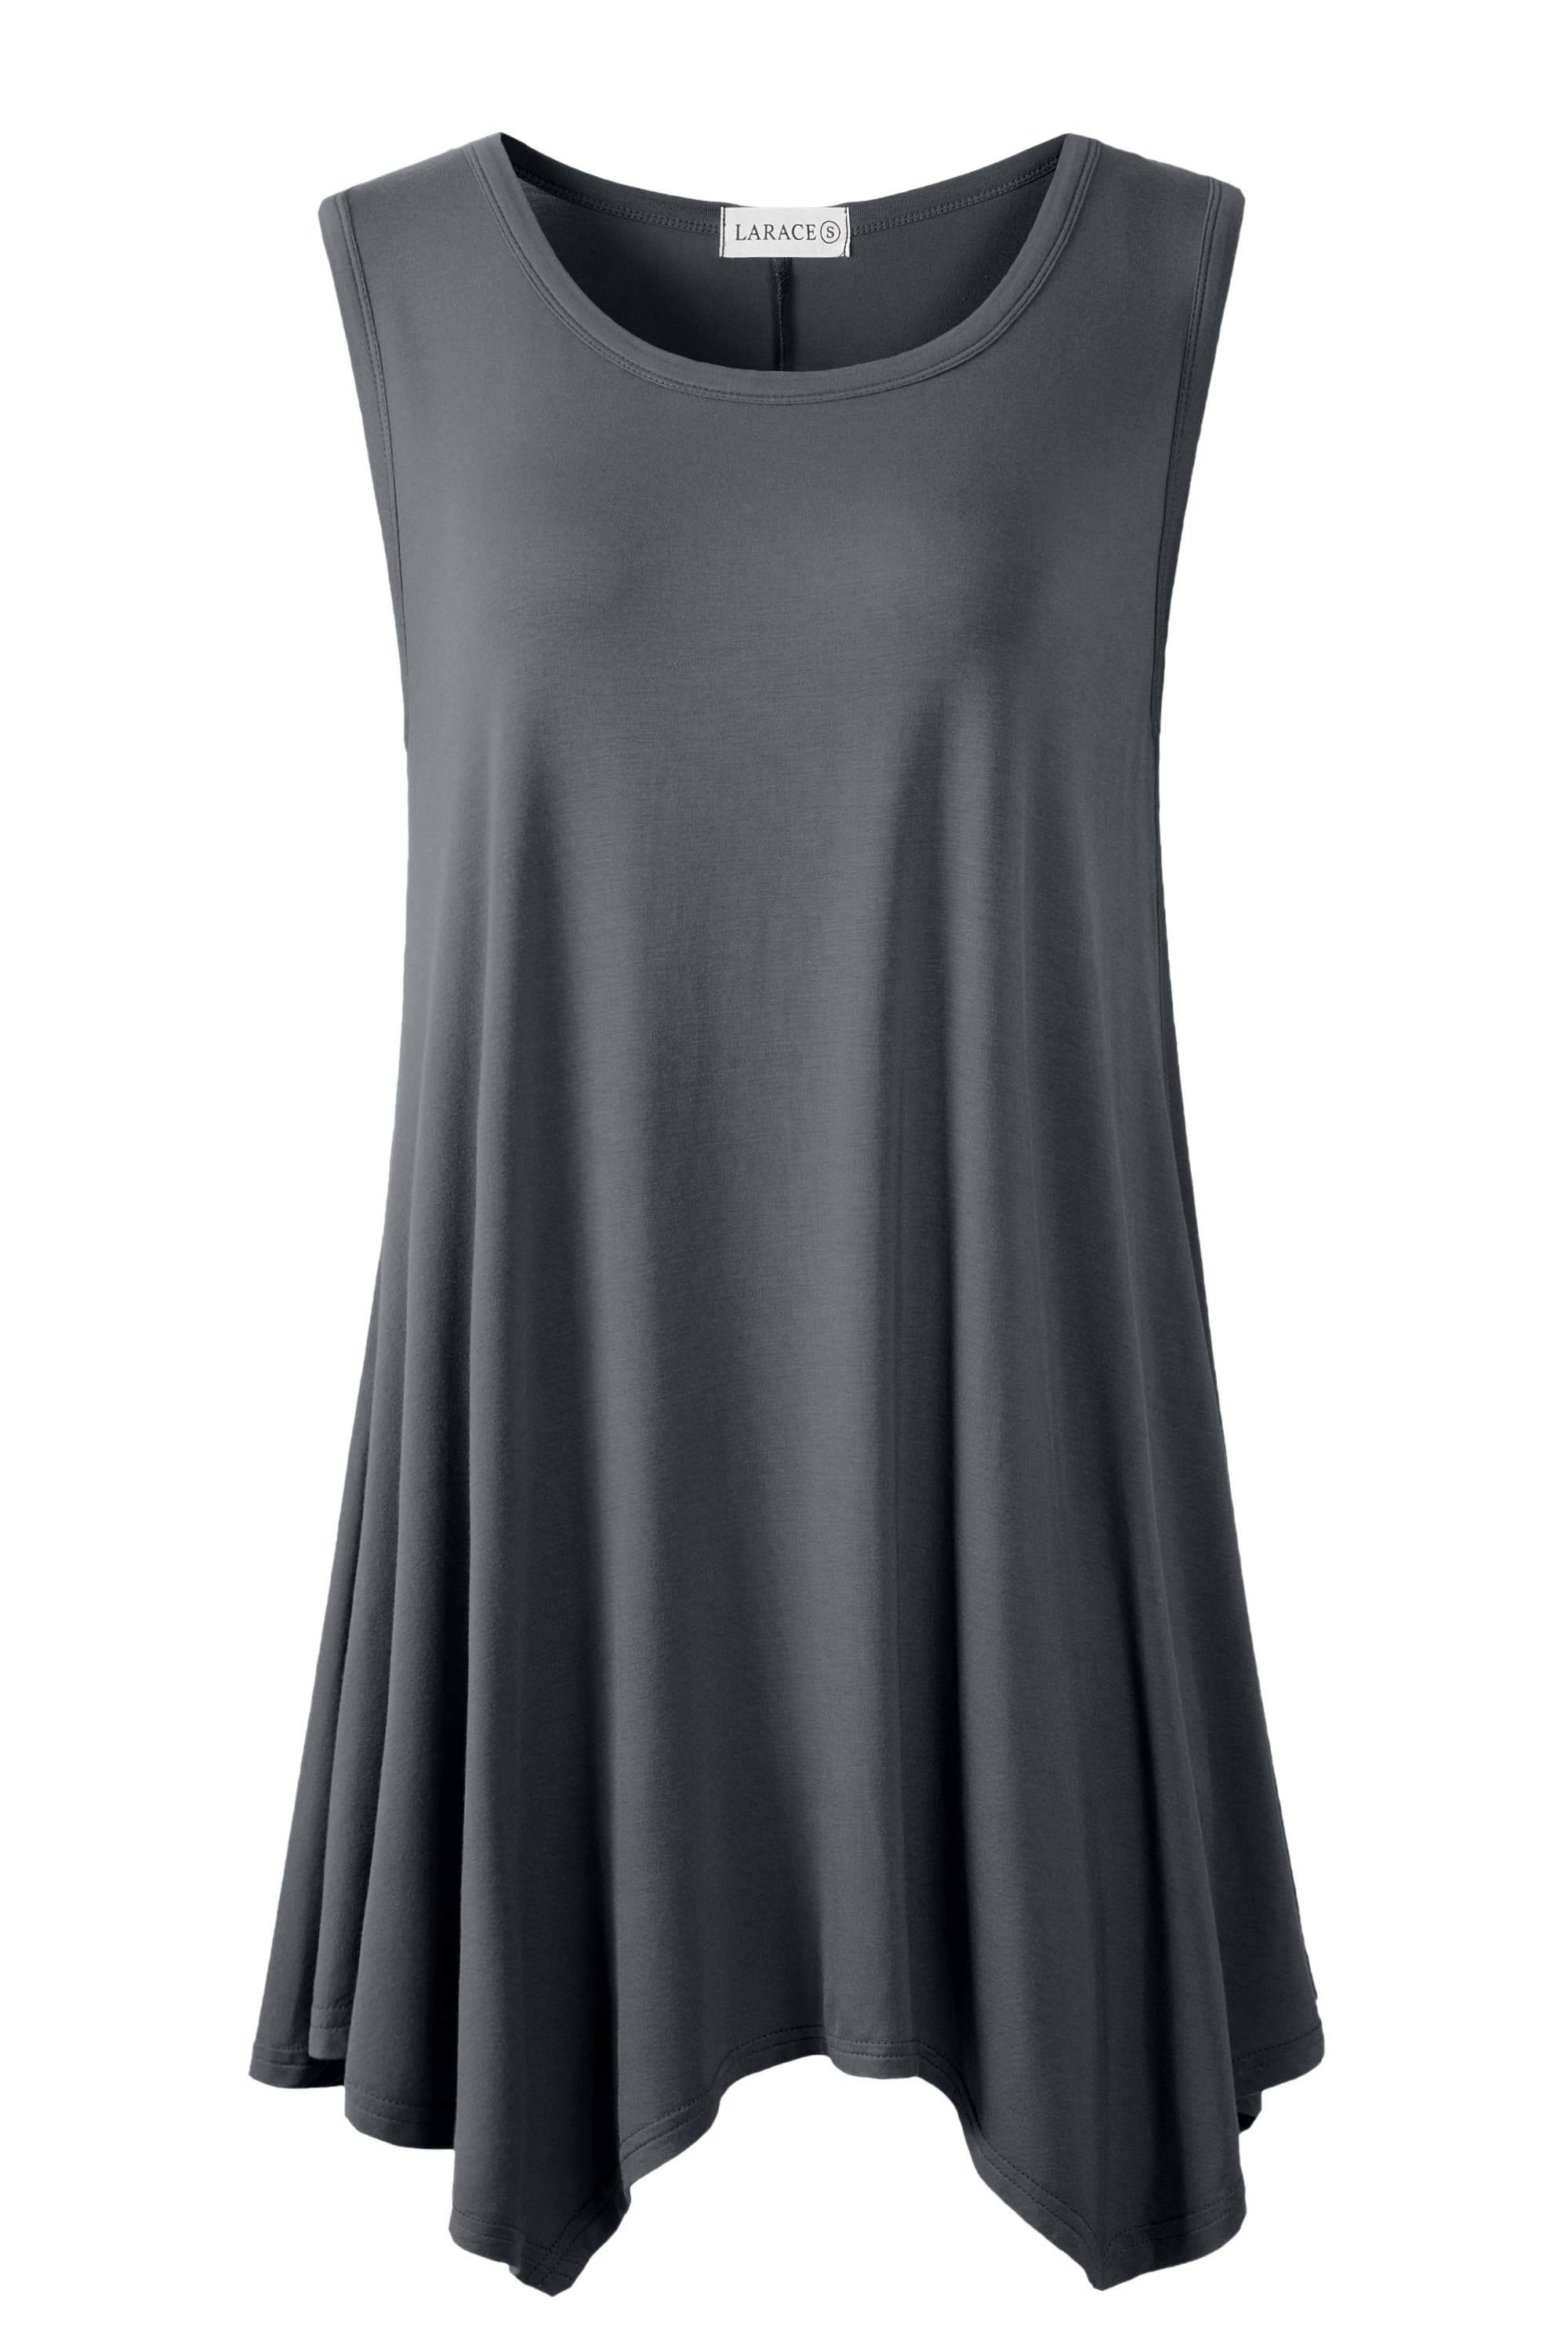 RQYYD Clearance Womens Tank Tops Crewneck Loose Fit Basic Solid Color  Casual Summer Sleeveless Flowy Shirts(Dark Gray,XXL) 